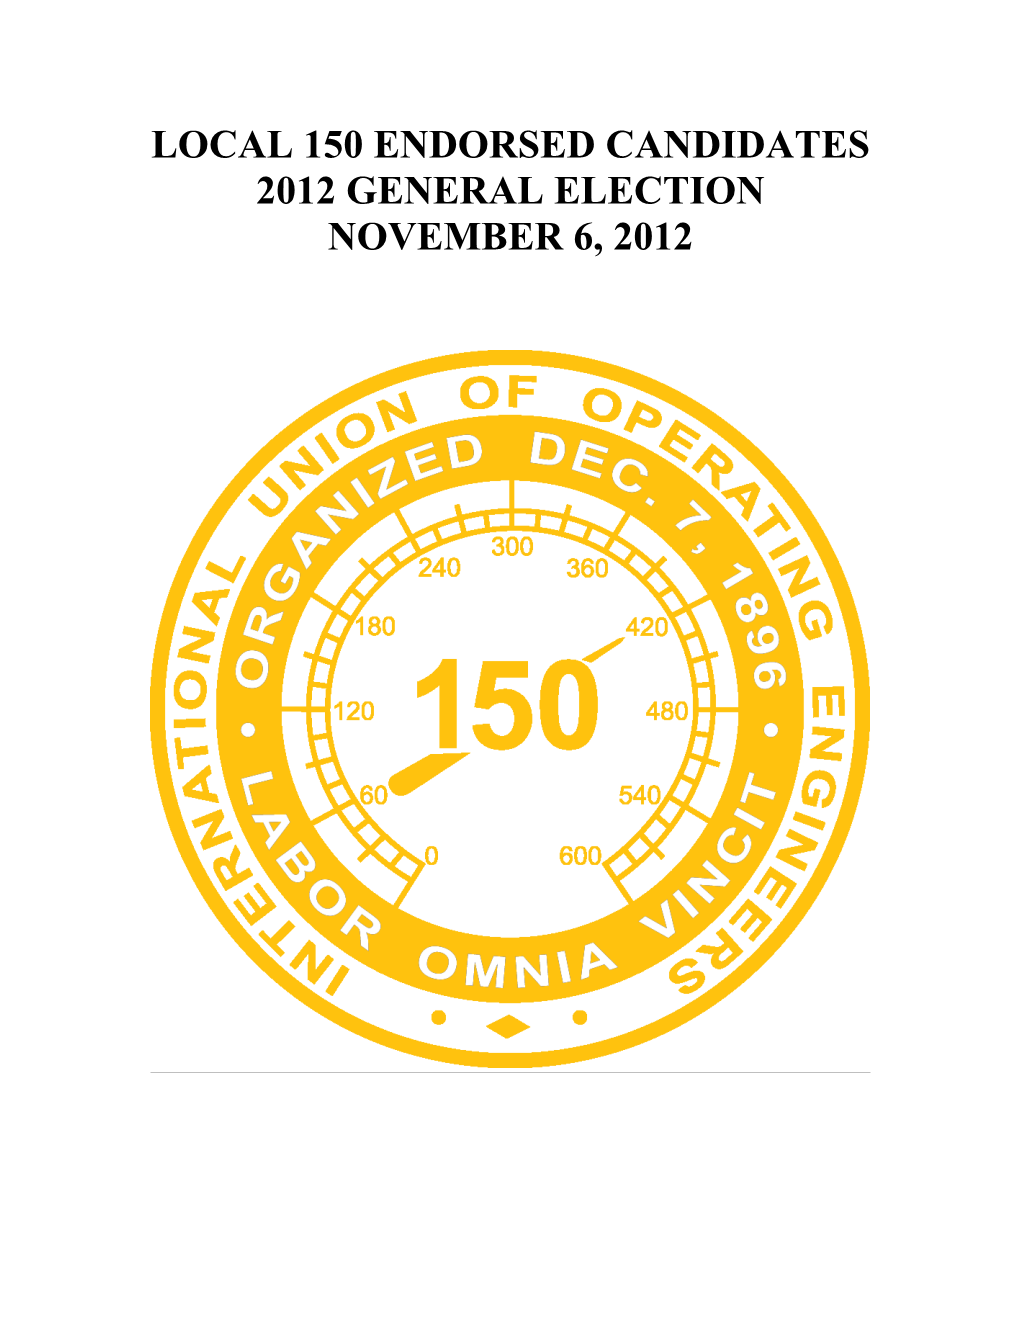 Local 150 Endorsed Candidates 2012 General Election November 6, 2012